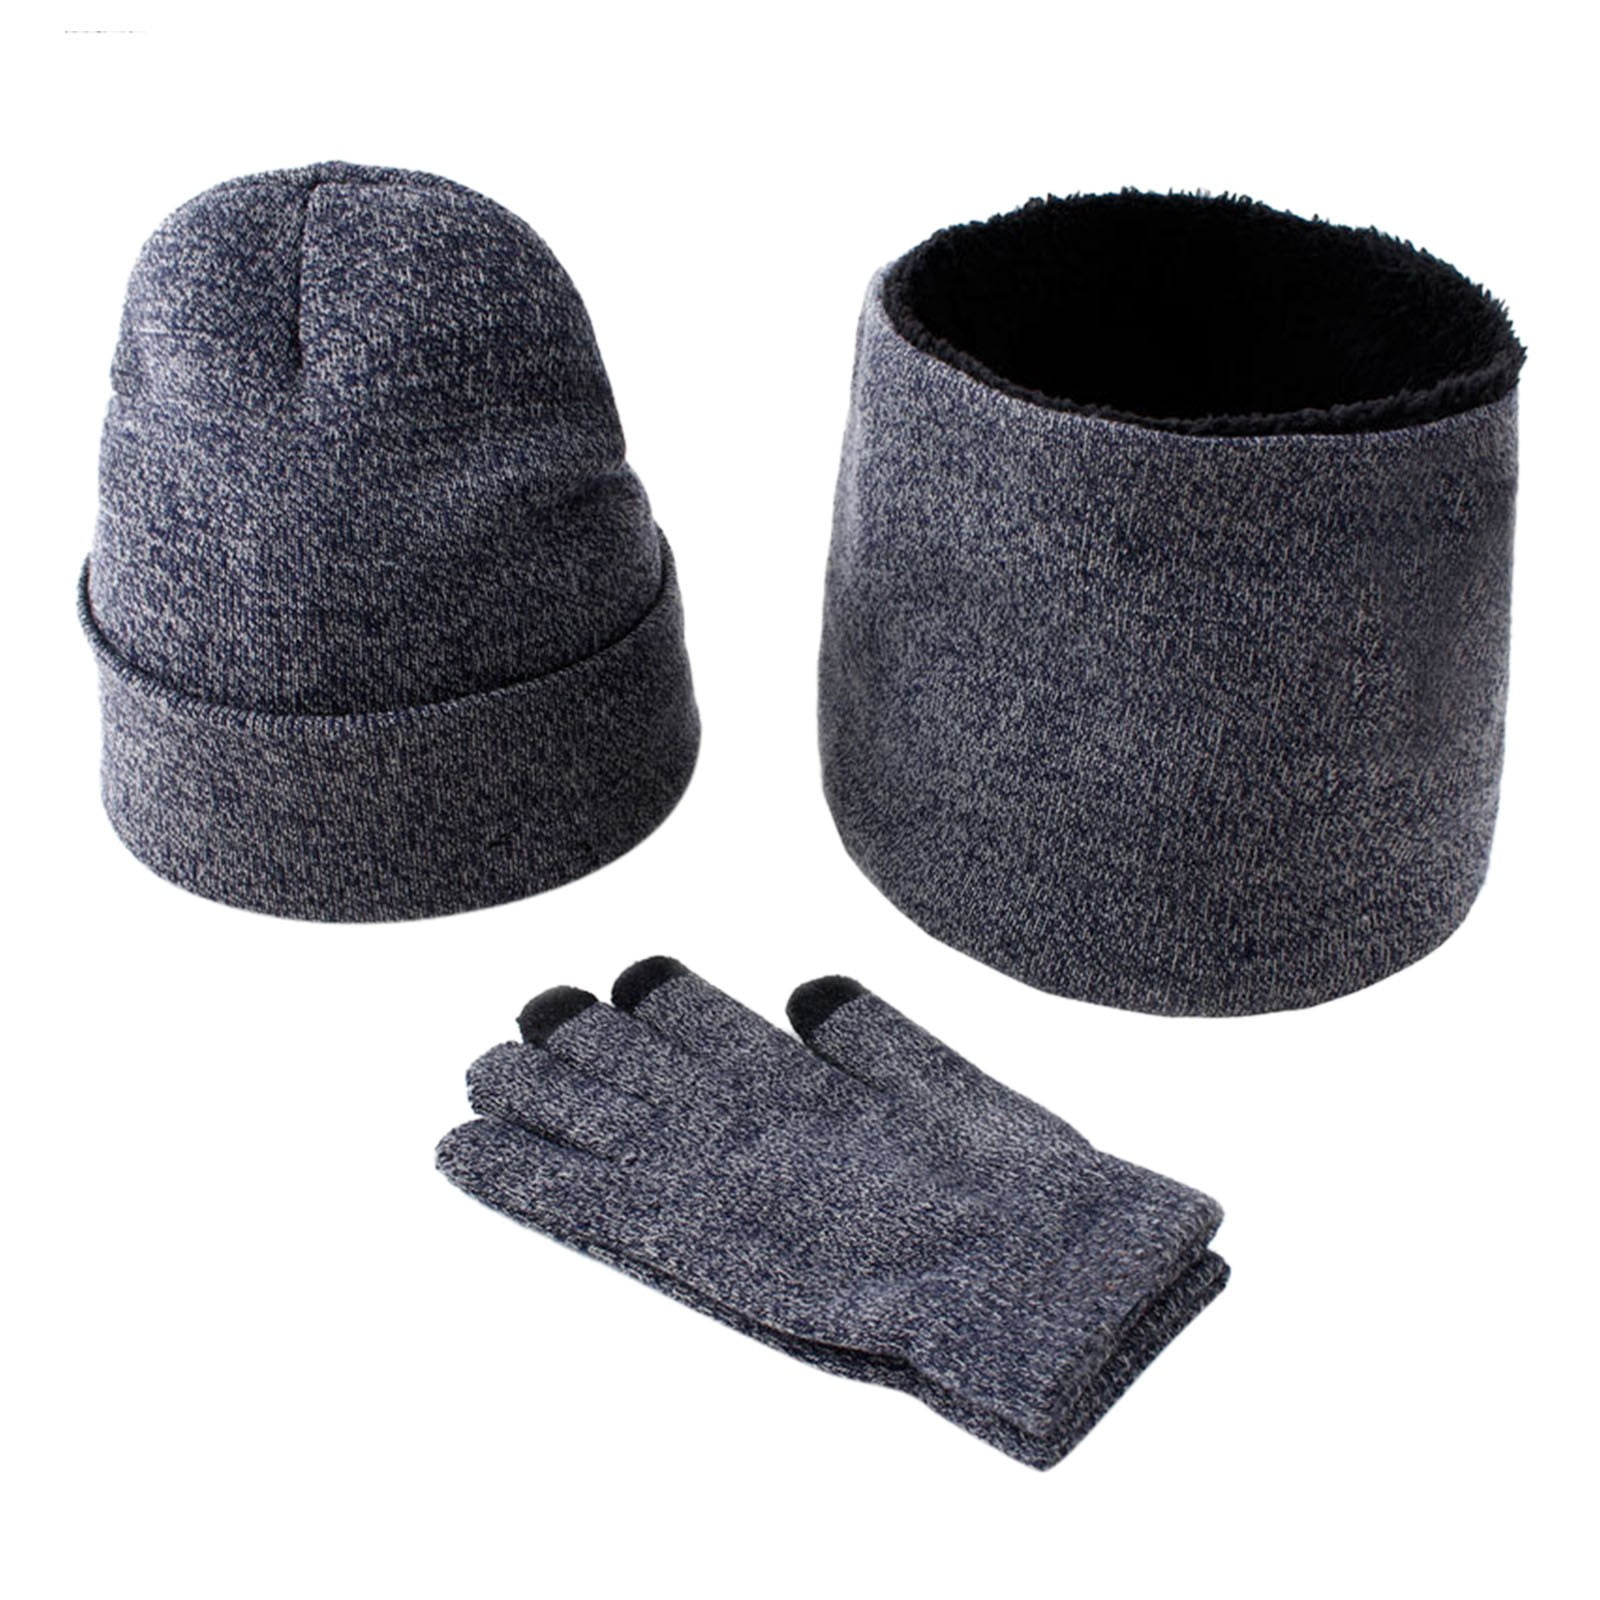 Designer Winter Scarf Set For Women And Men 2023 New Arrival: Warm Woolen  Beanies, Mens Hat And Scarf, Shawl, And Snow Hat Gloves With High Quality  Scarps From Teabag777, $8.05